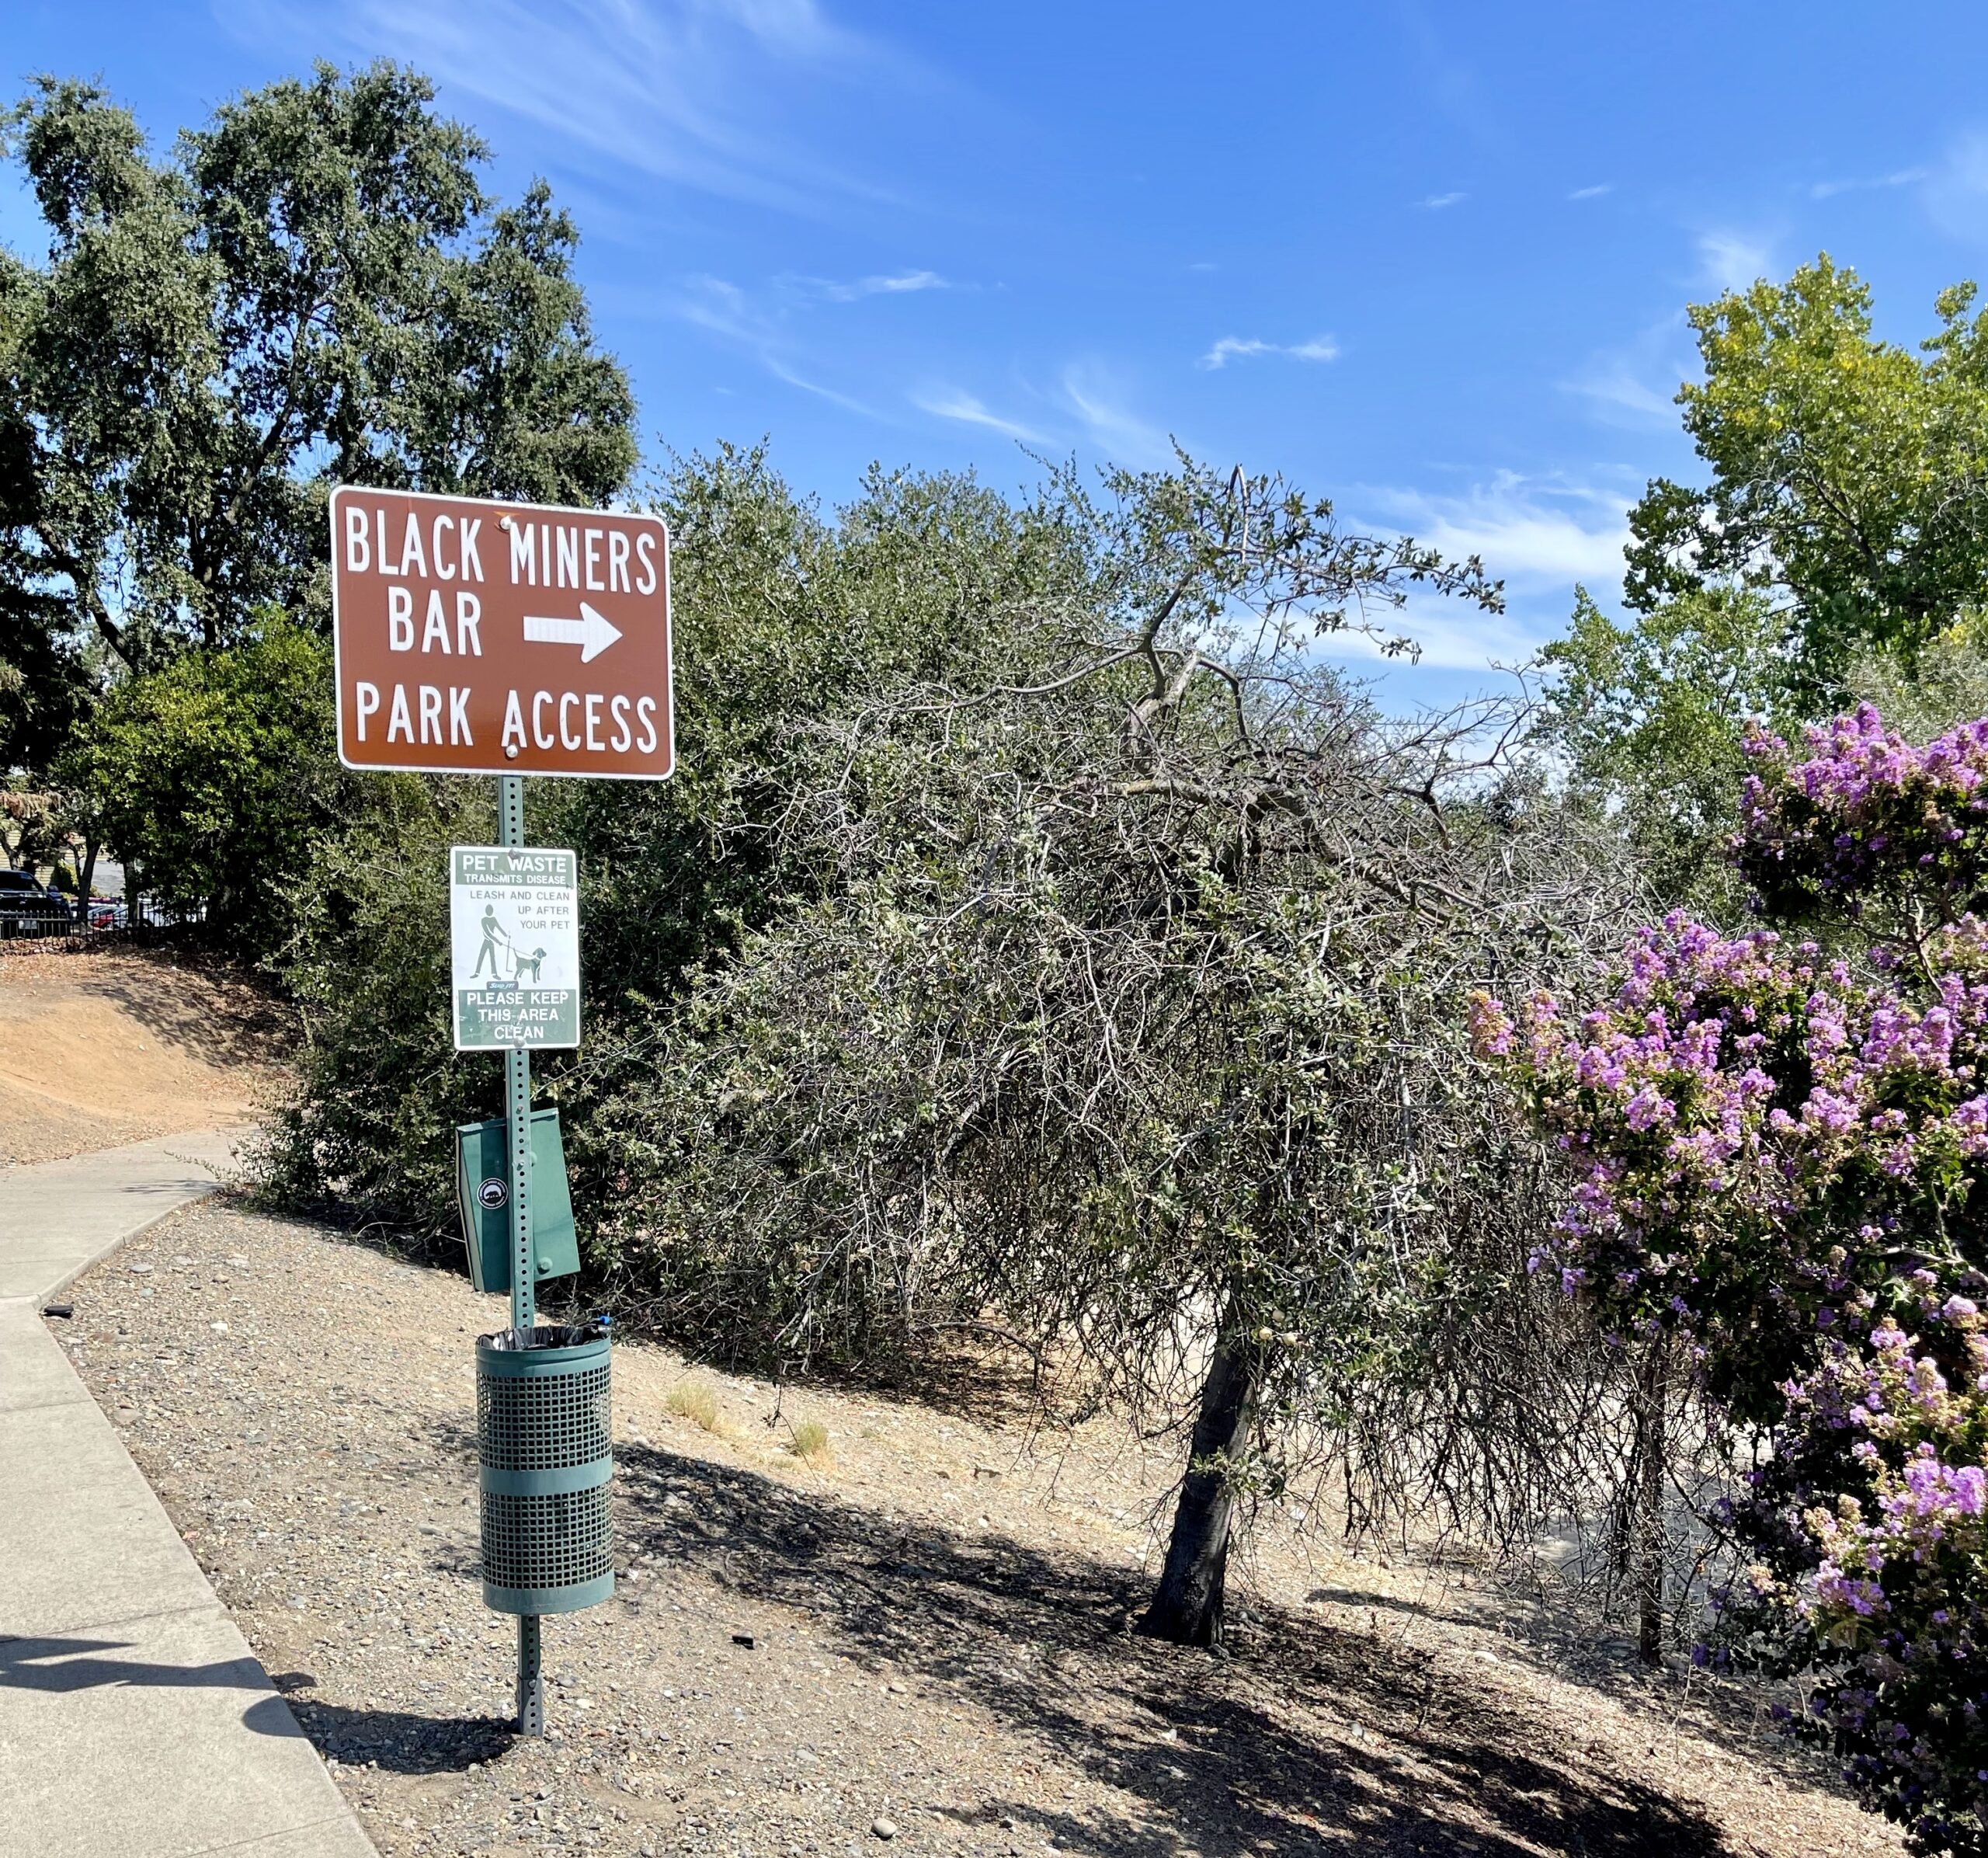 Street sign pointing the way to Black Miners Bar Park Access. Folsom Lake State Recreation Area.